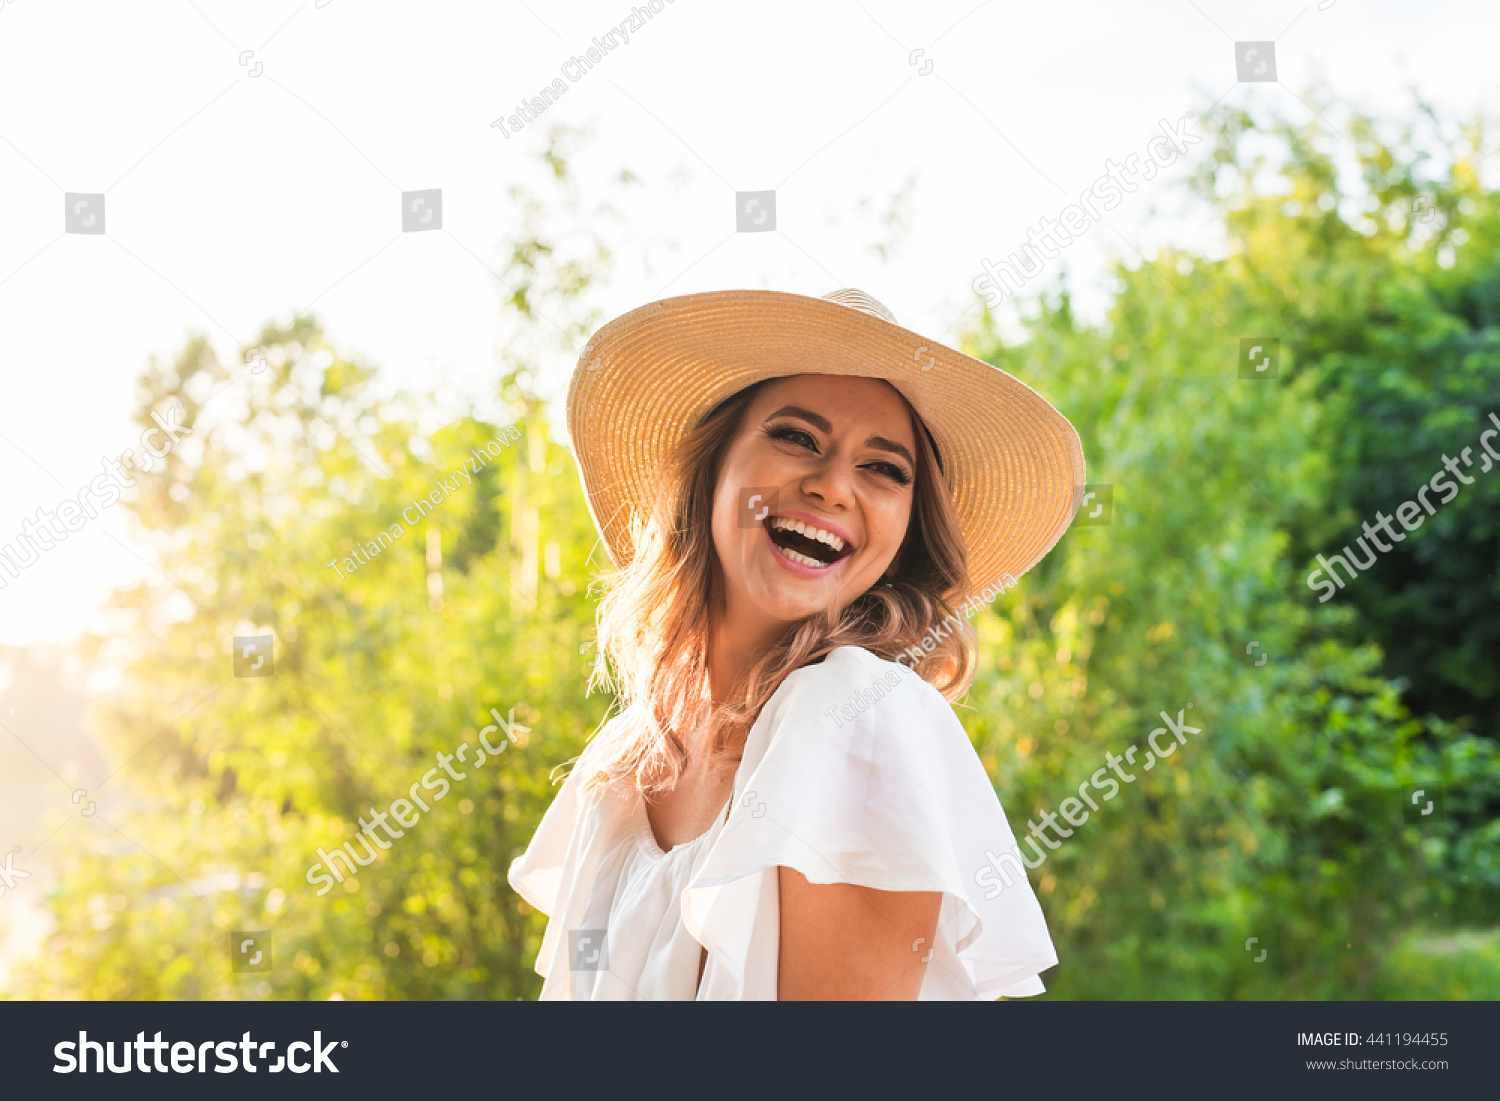 Laughing young woman enjoying her time outside in park with sunset in background. #441194455